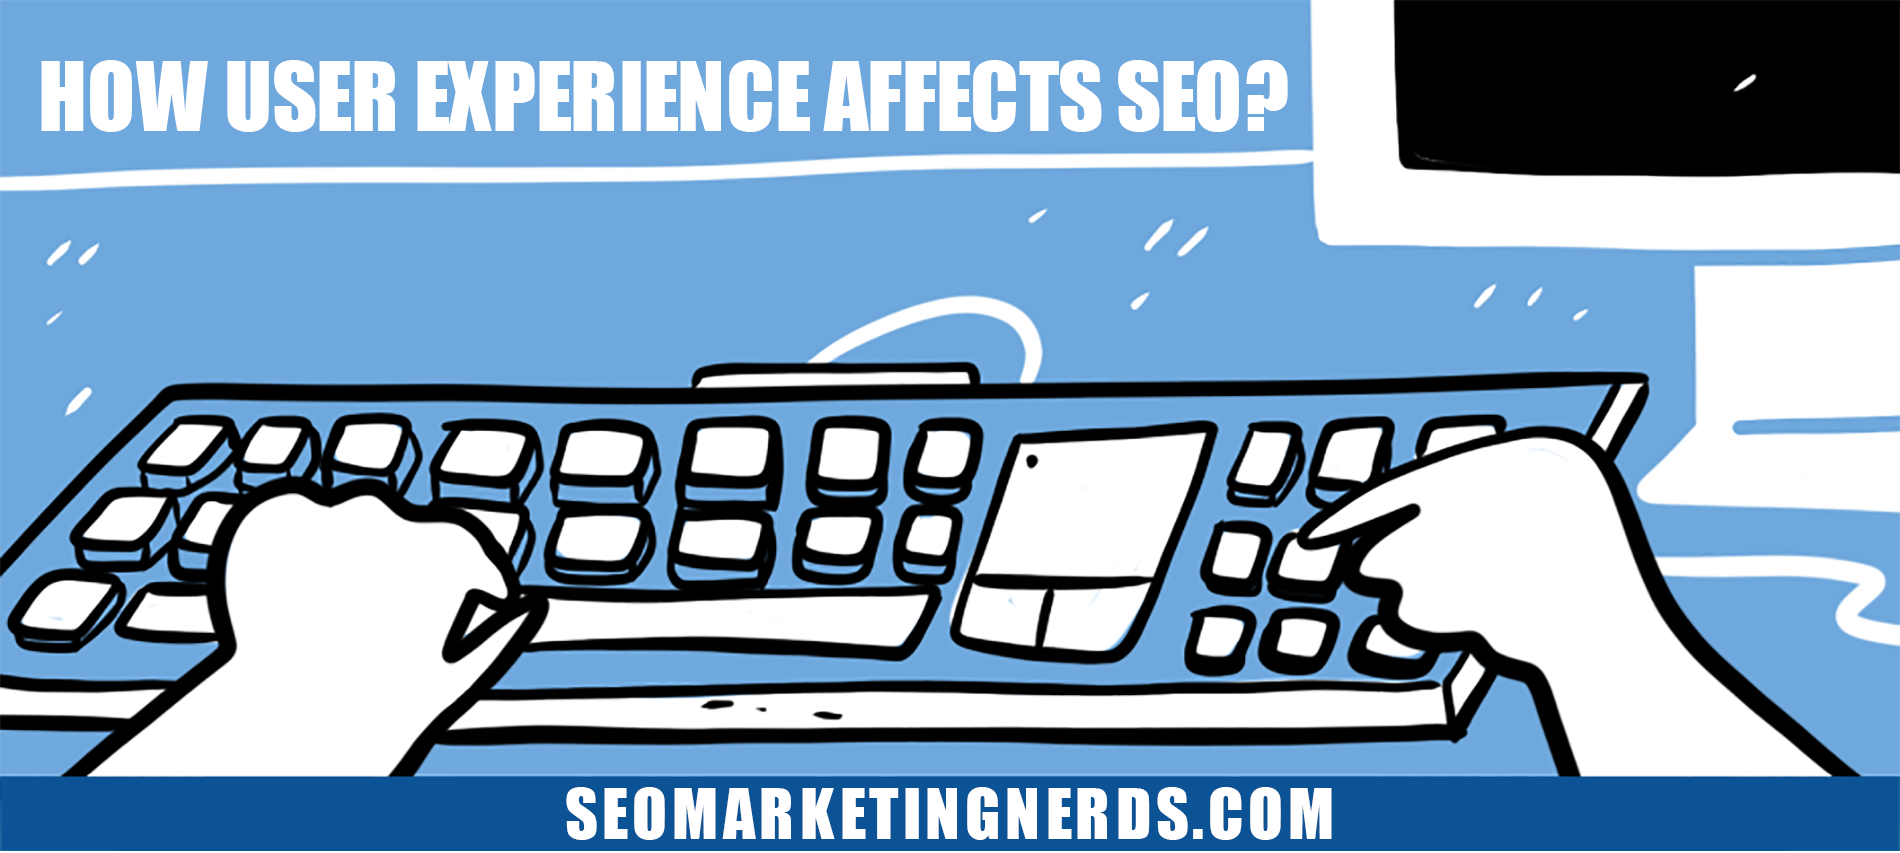 How User Experience Affects SEO?